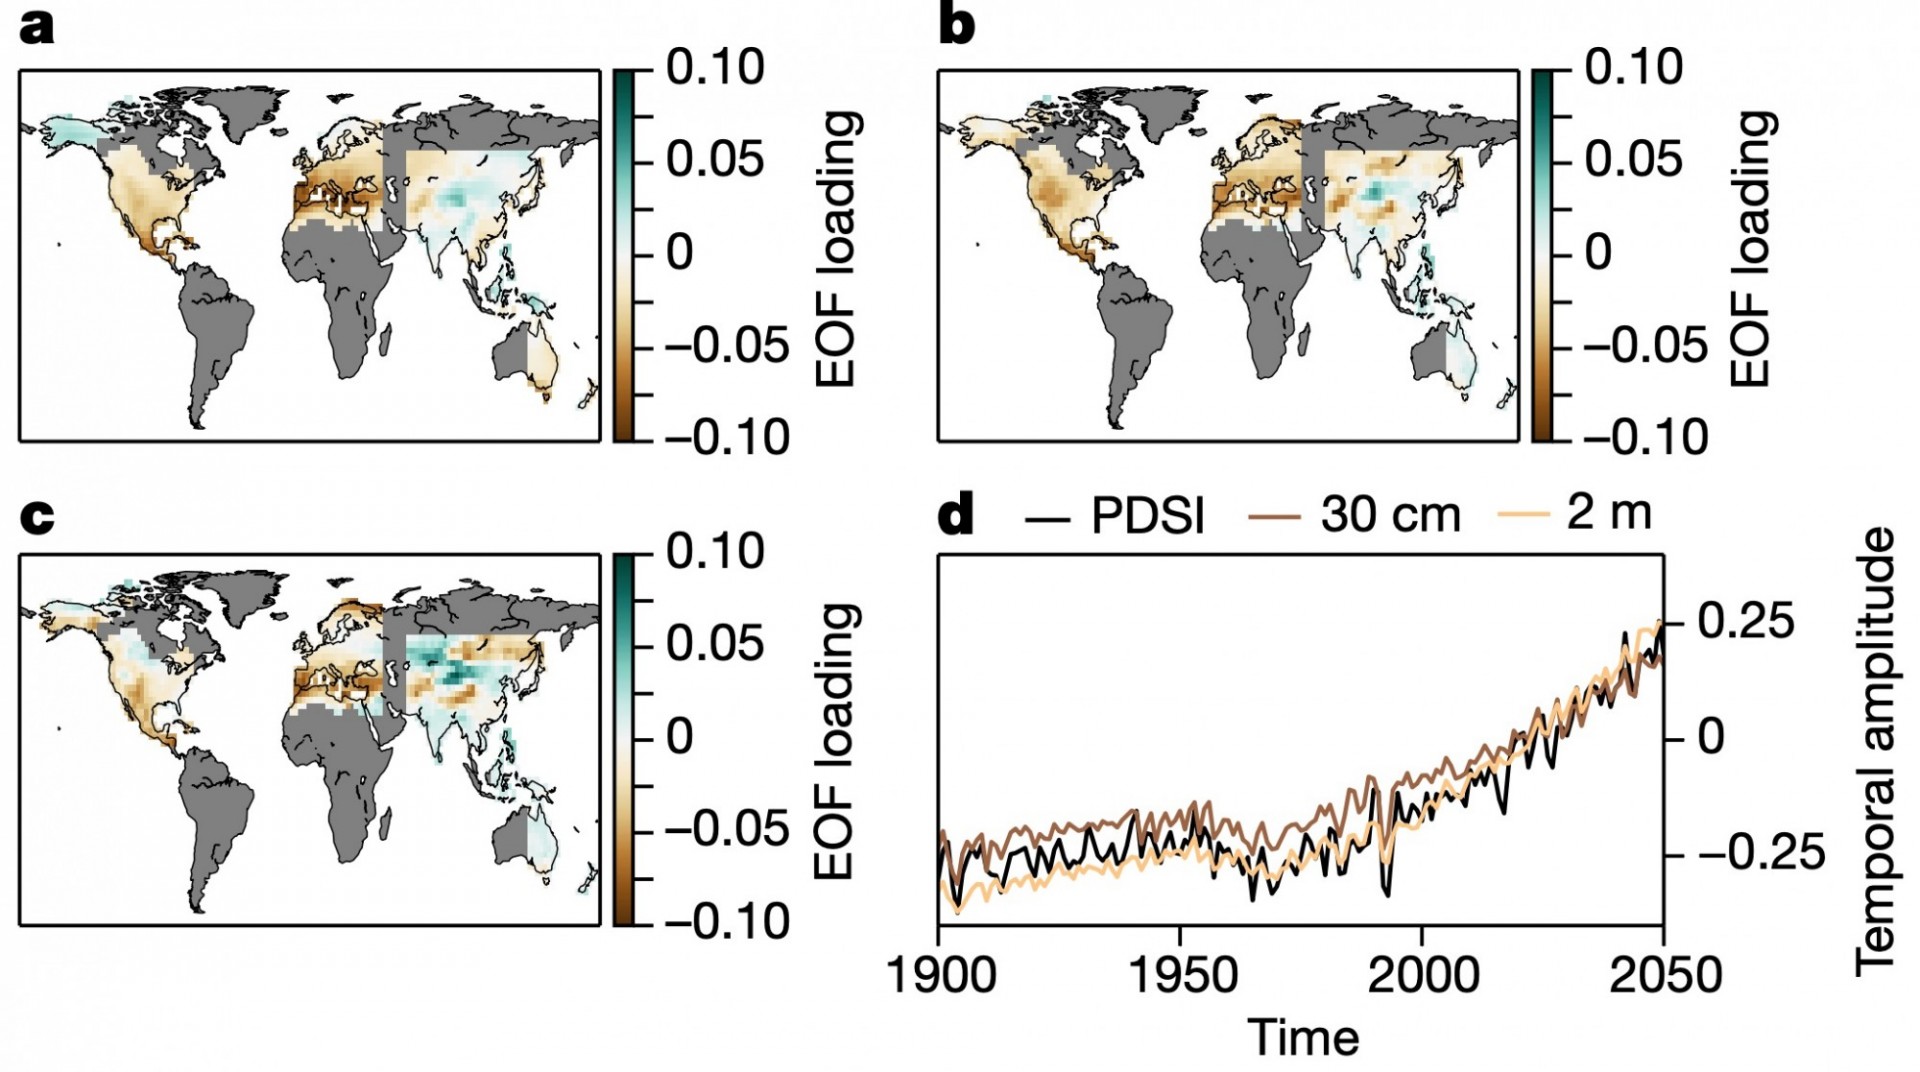 Global Fingerprints. a–c, Fingerprints for PDSI (a), column-integrated soil moisture to 30 cm (b) and column-integrated soil moisture to 2 m (c), defined as the leading EOF of the multi-model average of H85 for each variable over the 1900–2099 period. d, The associated principal components for each of the EOFs in a–c. Land areas over which no drought atlas data exist are shaded in grey.